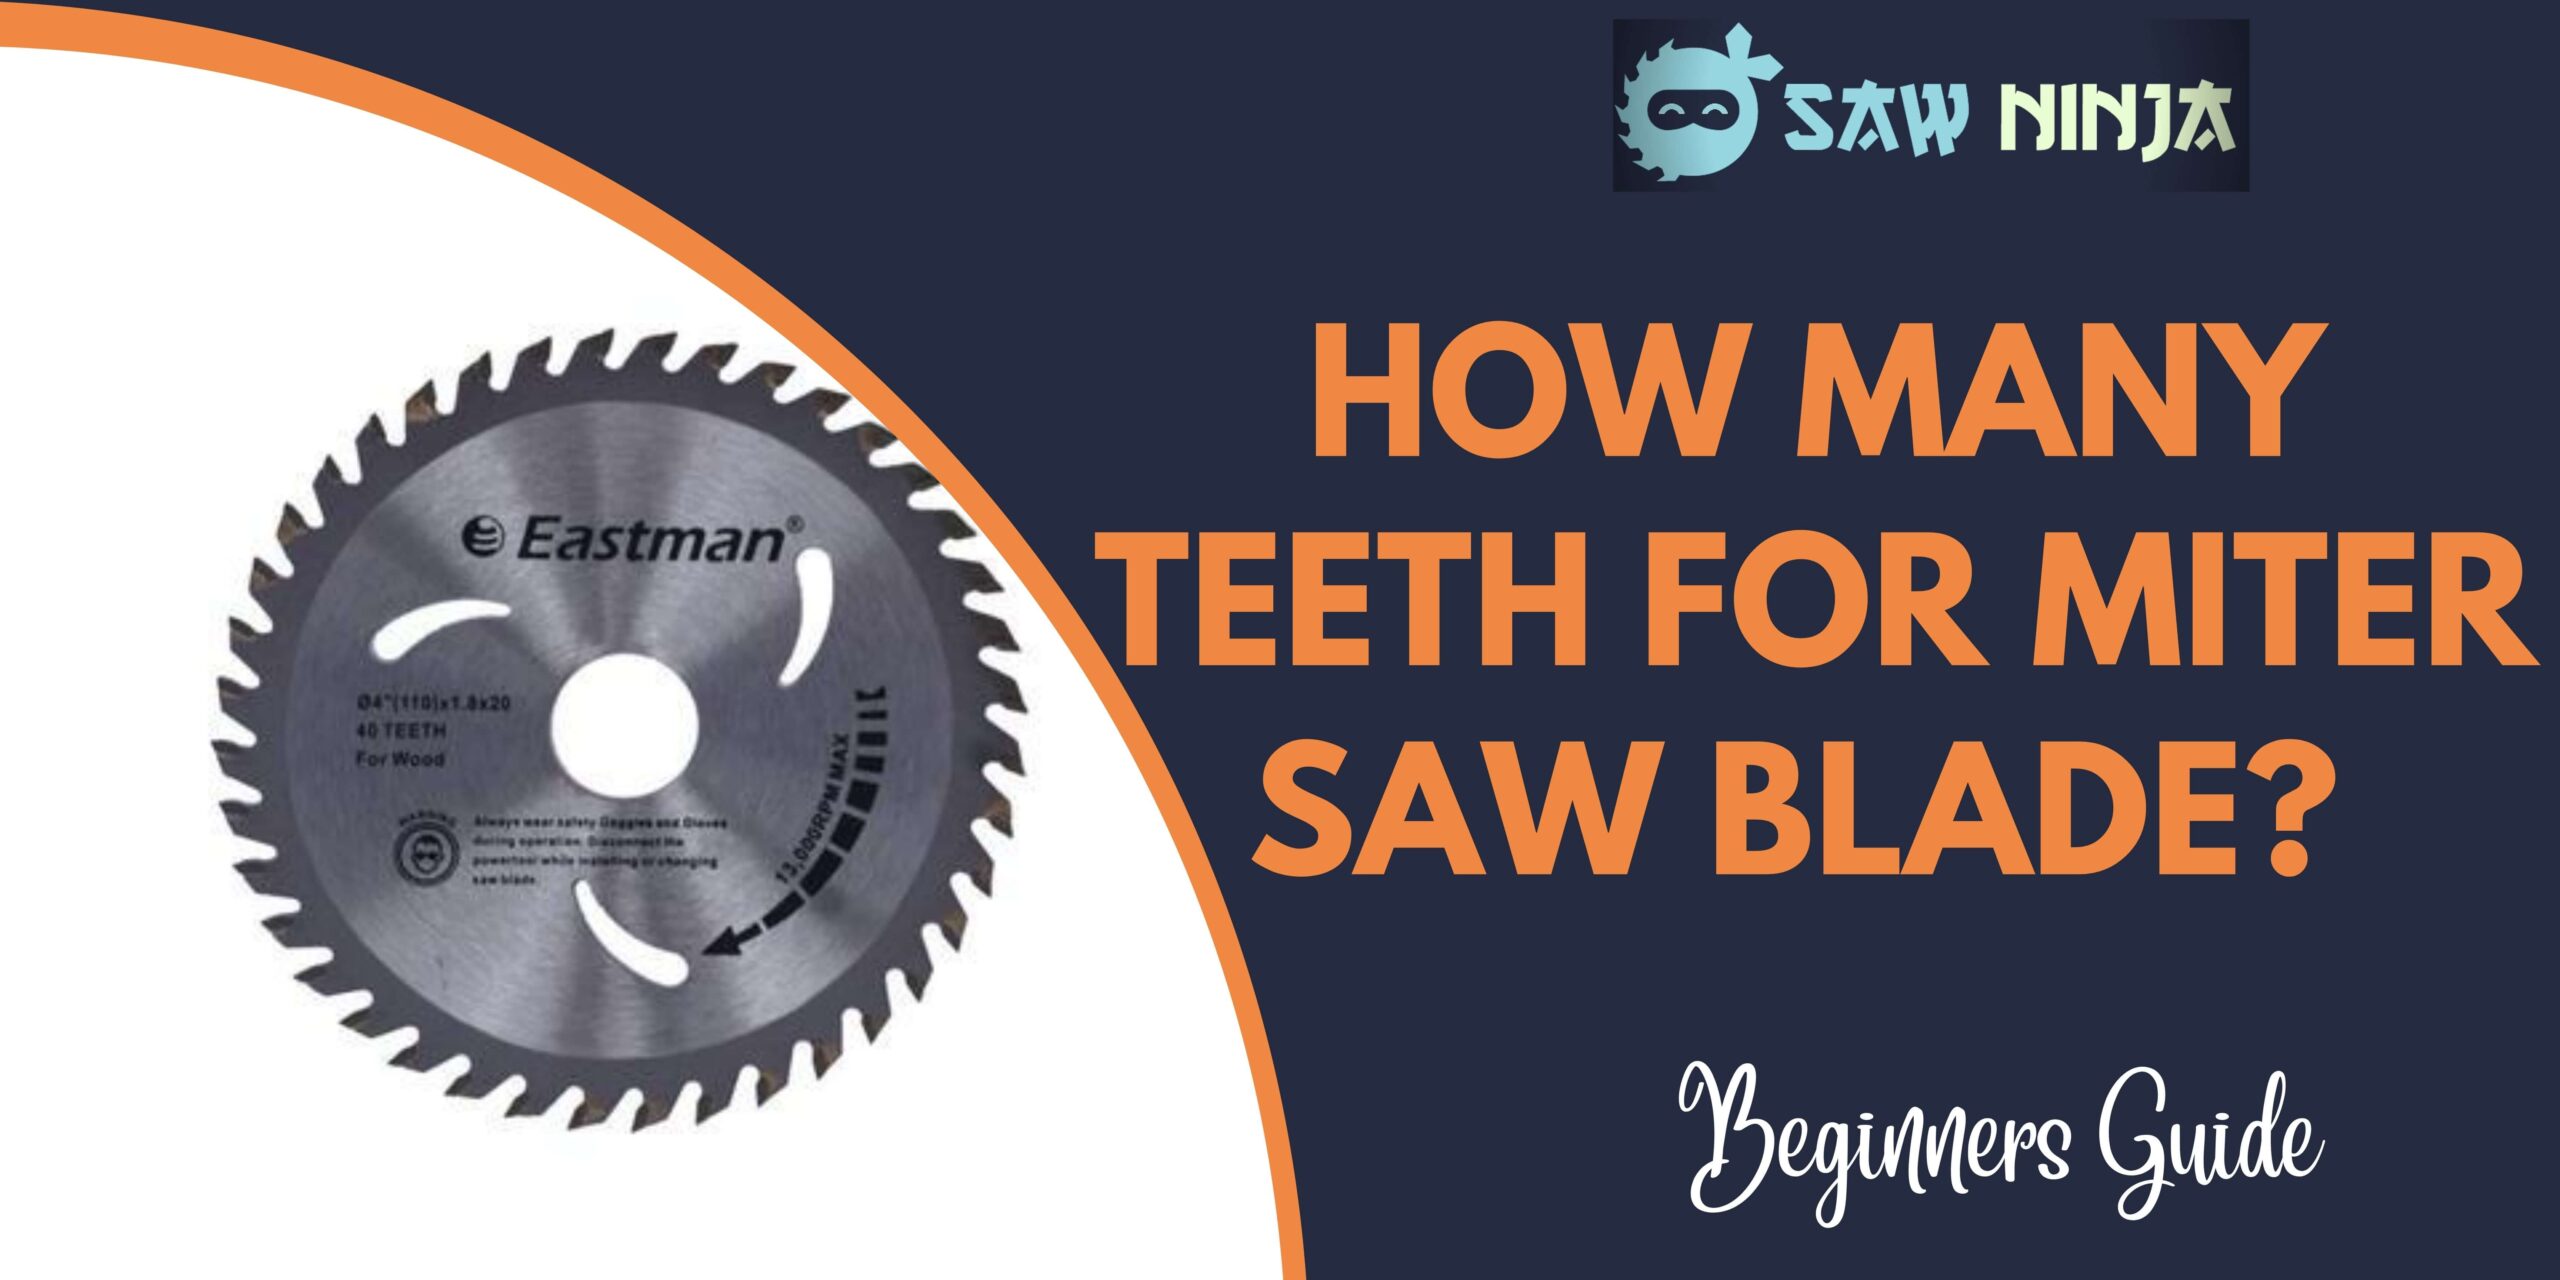 How Many Teeth for Miter Saw Blade